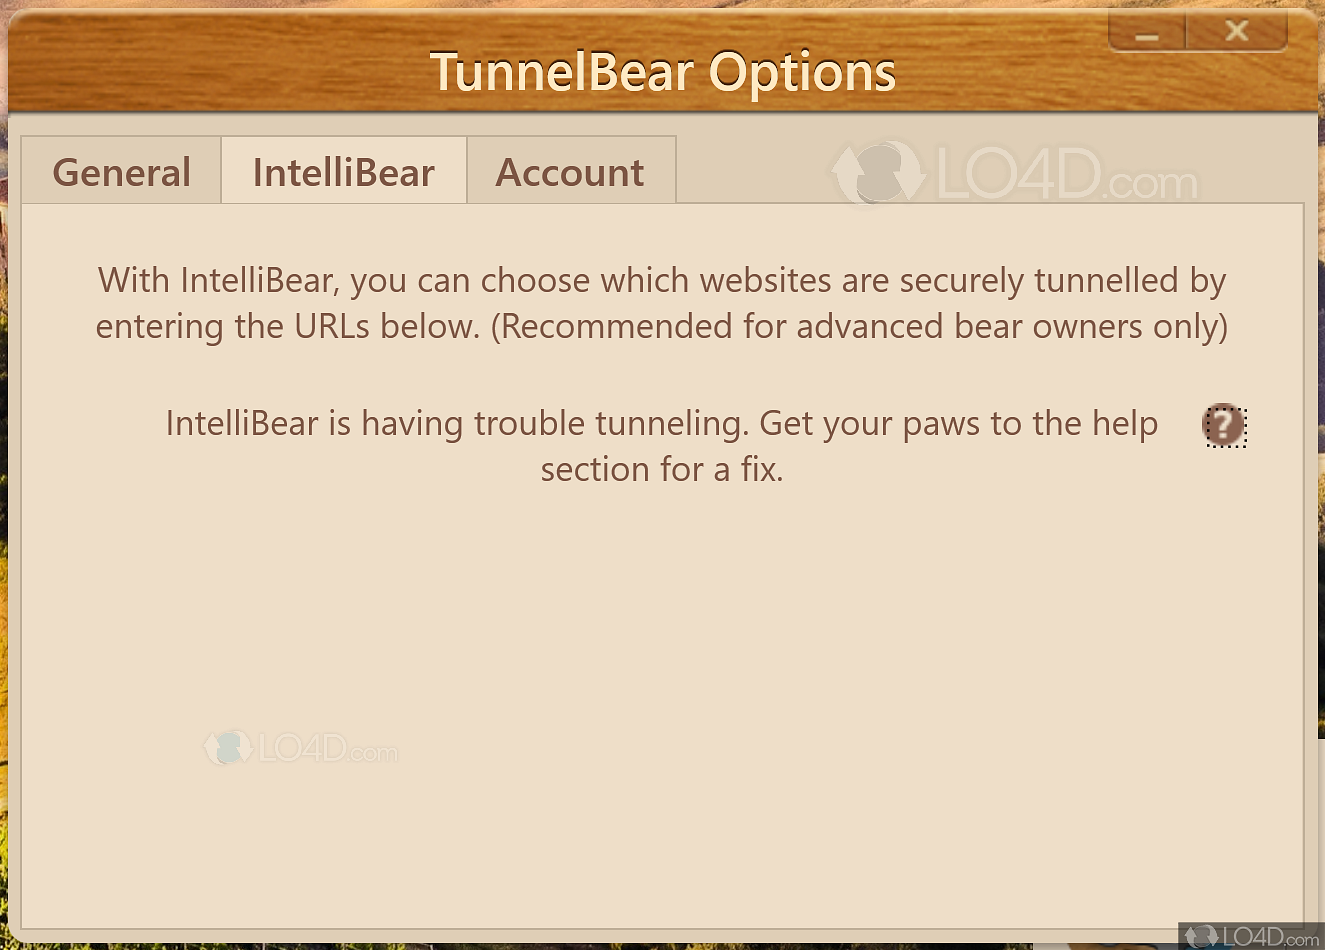 torrenting with tunnelbear